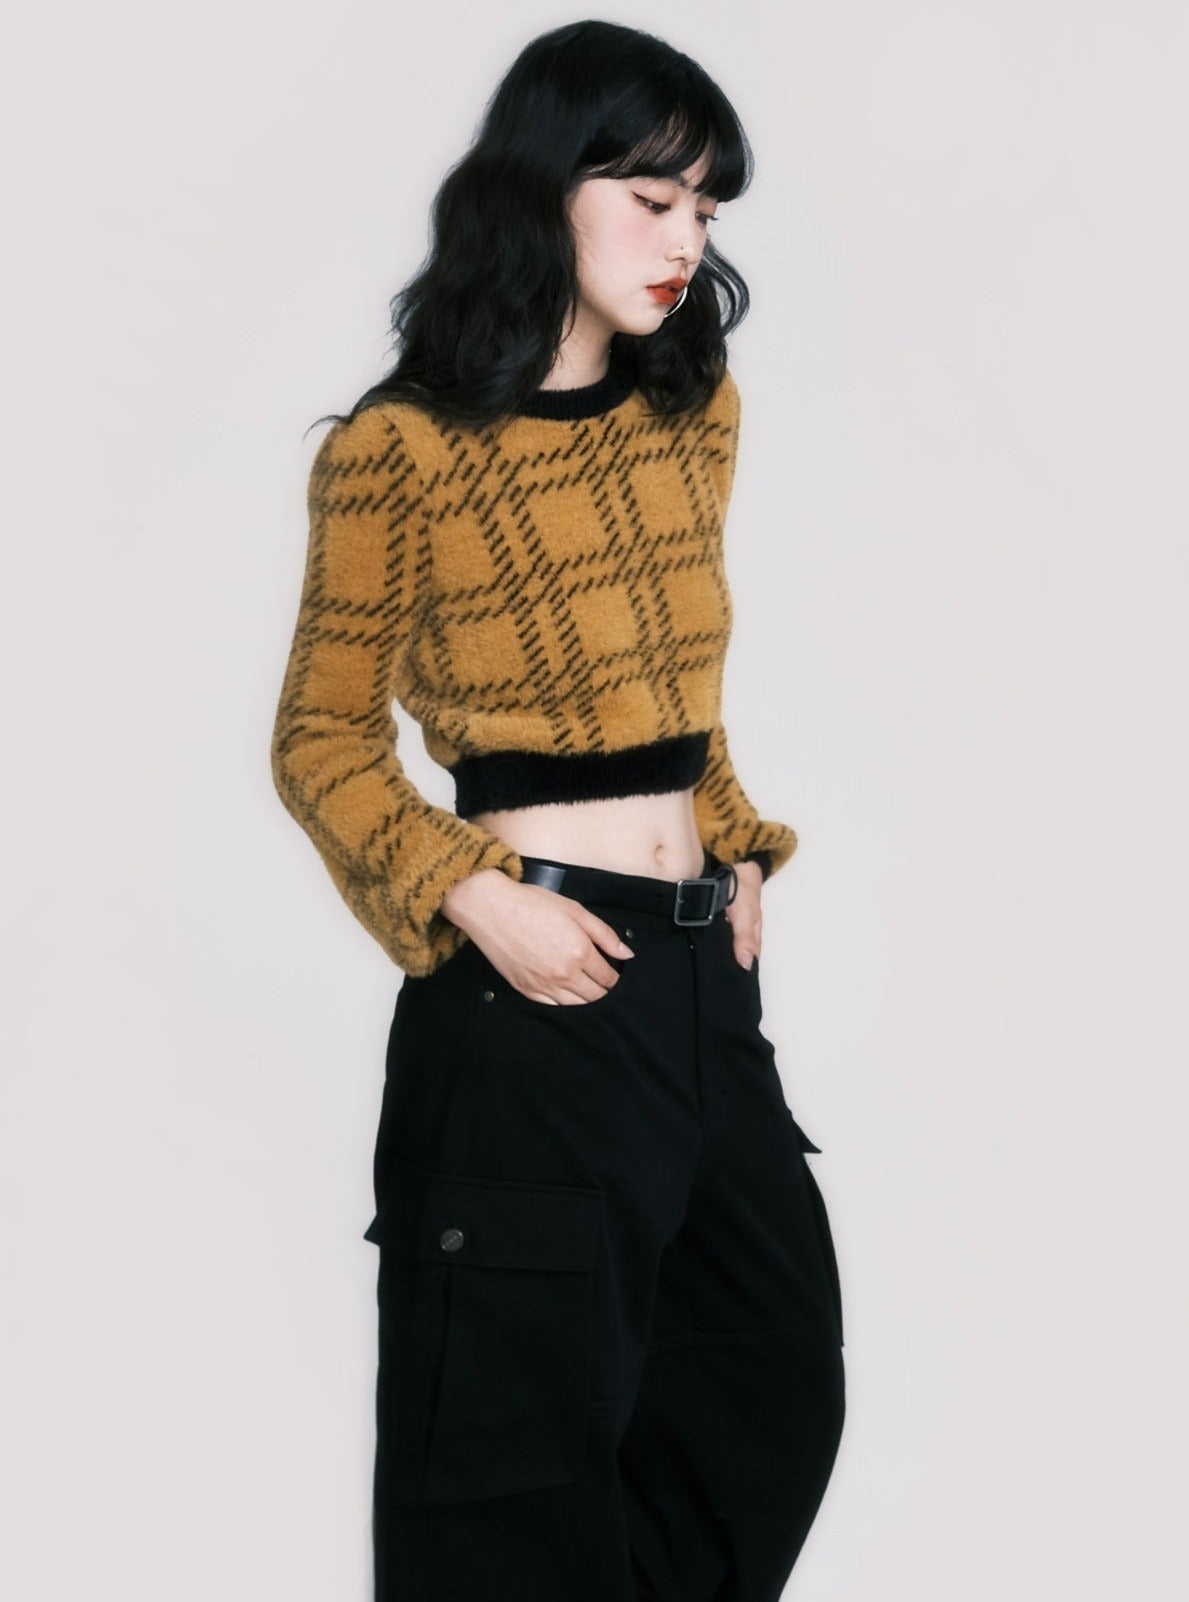 AMERICAN SLOUCHY PULLOVER SWEATER TOP